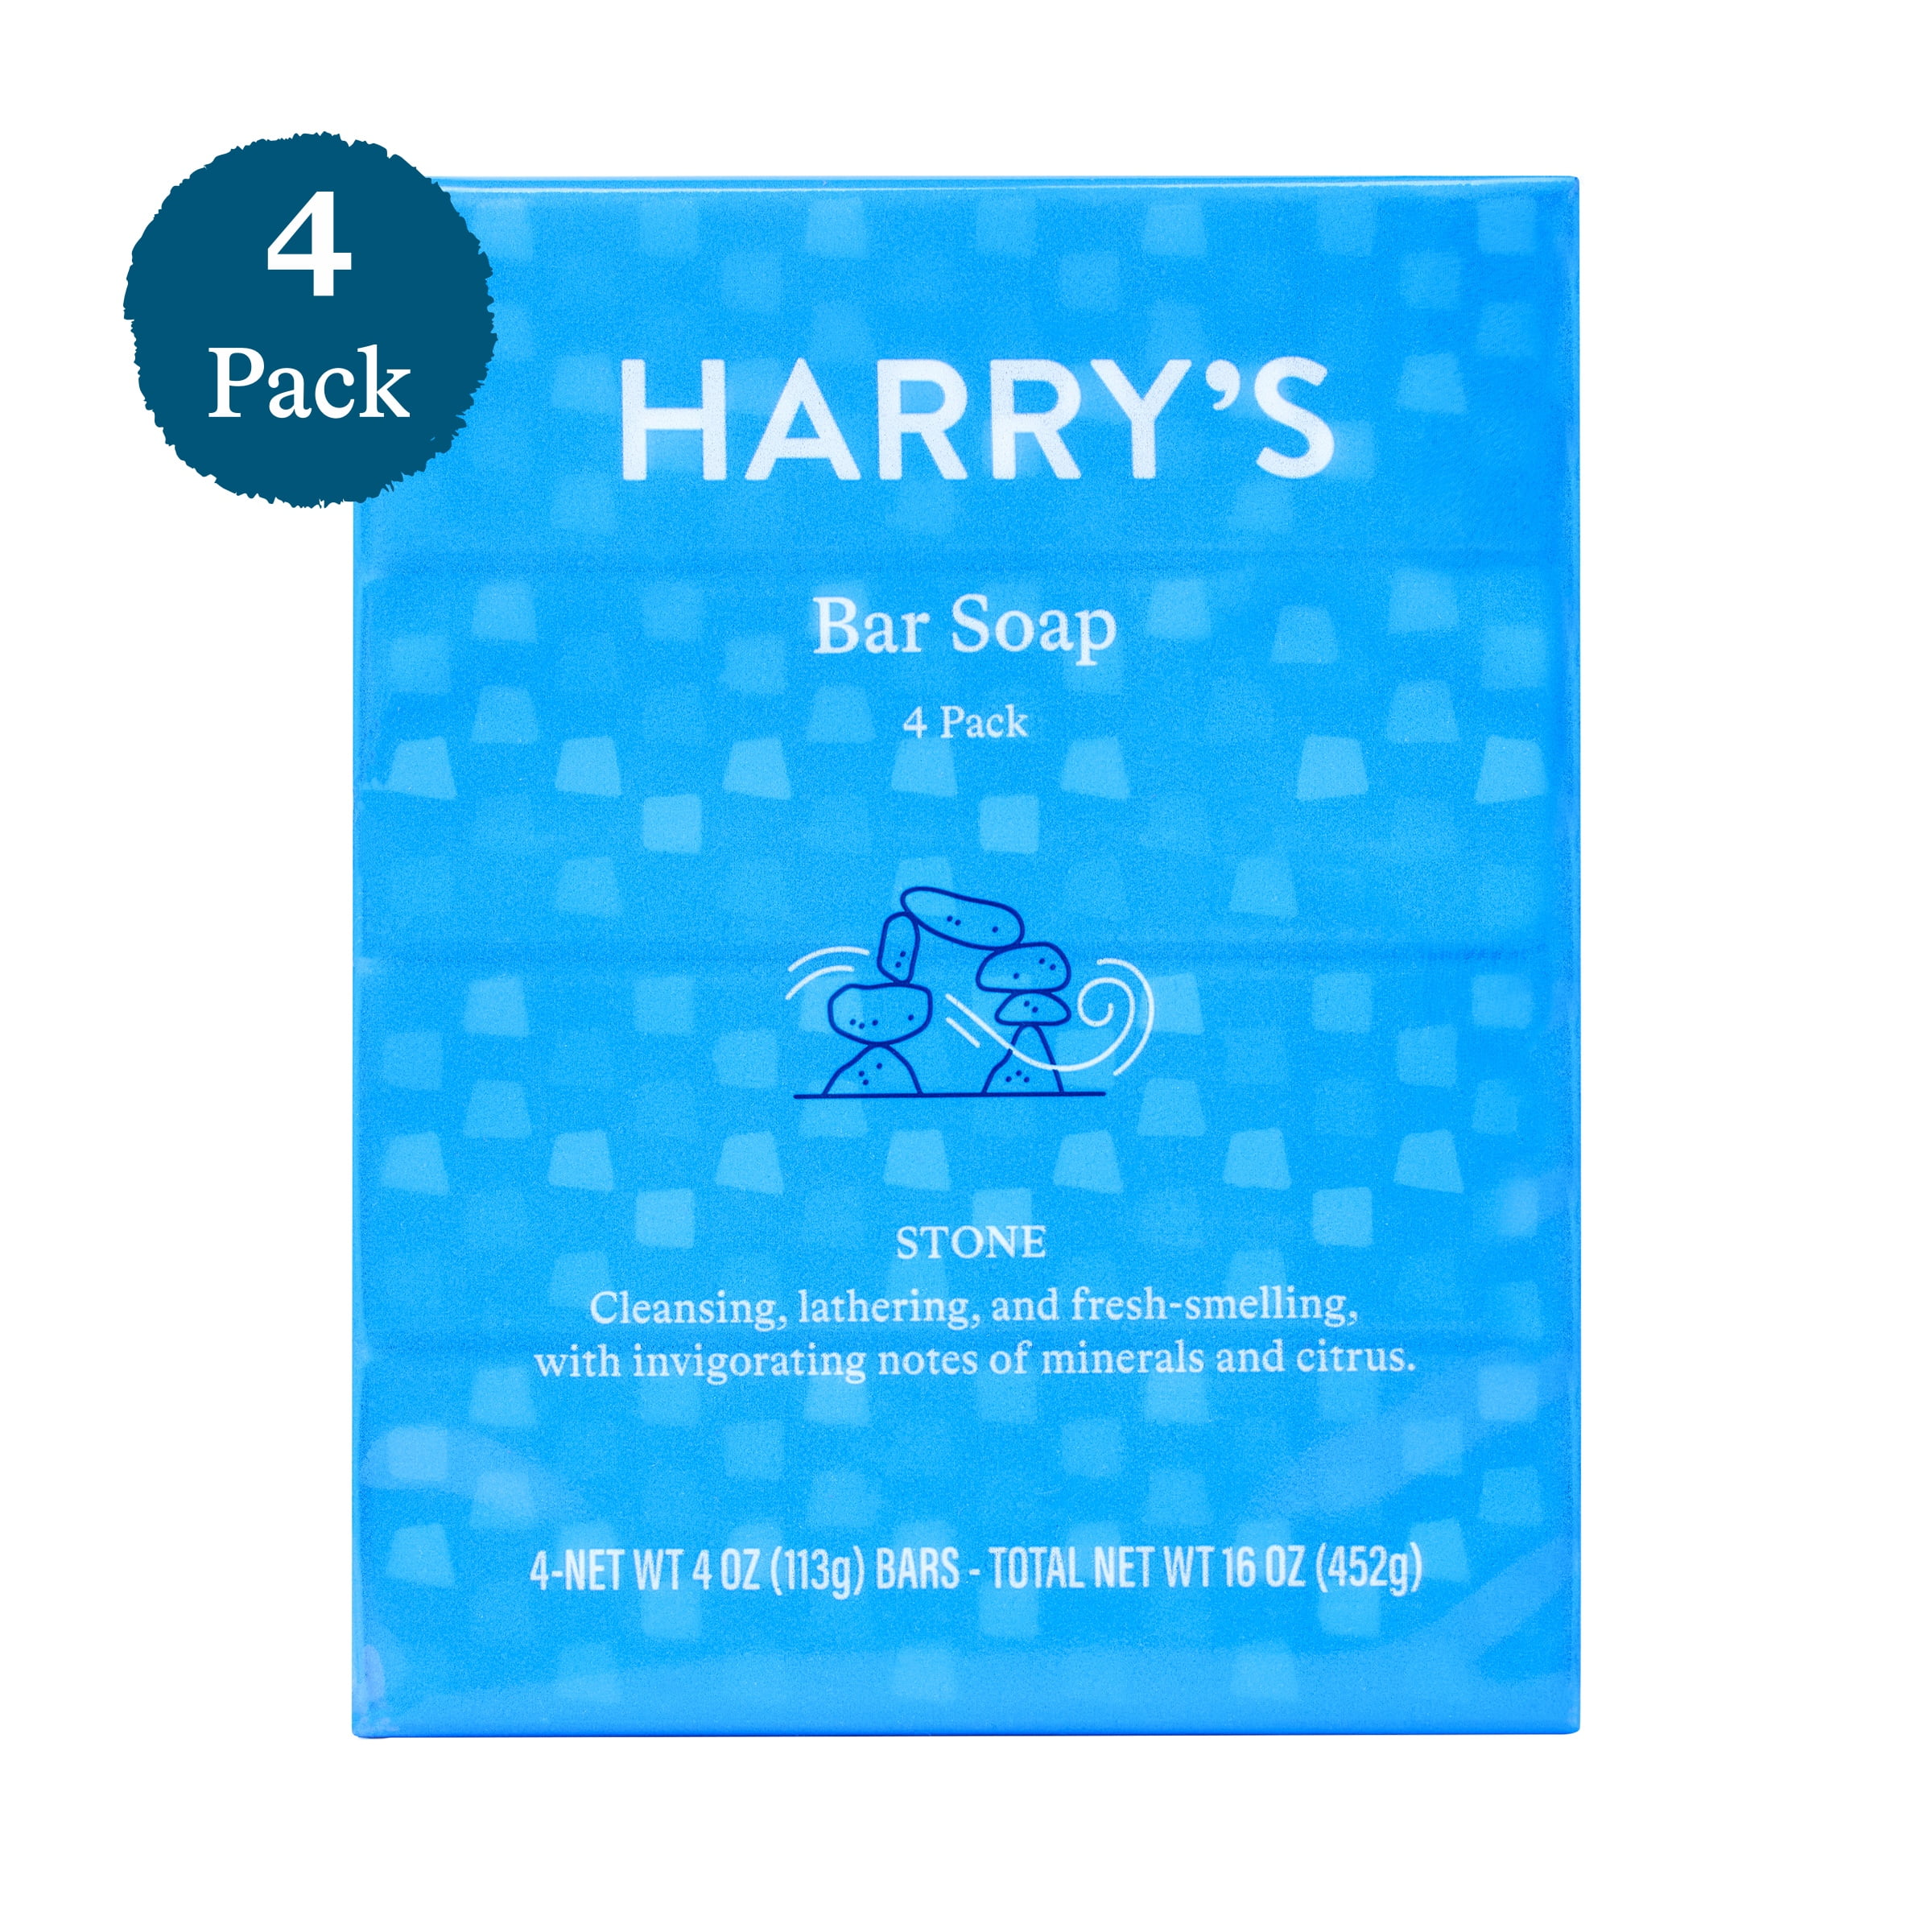 Dropship Harry's Men's Cleansing Bar Soap, Redwood Scent, 4 Oz, 4 Pack to  Sell Online at a Lower Price